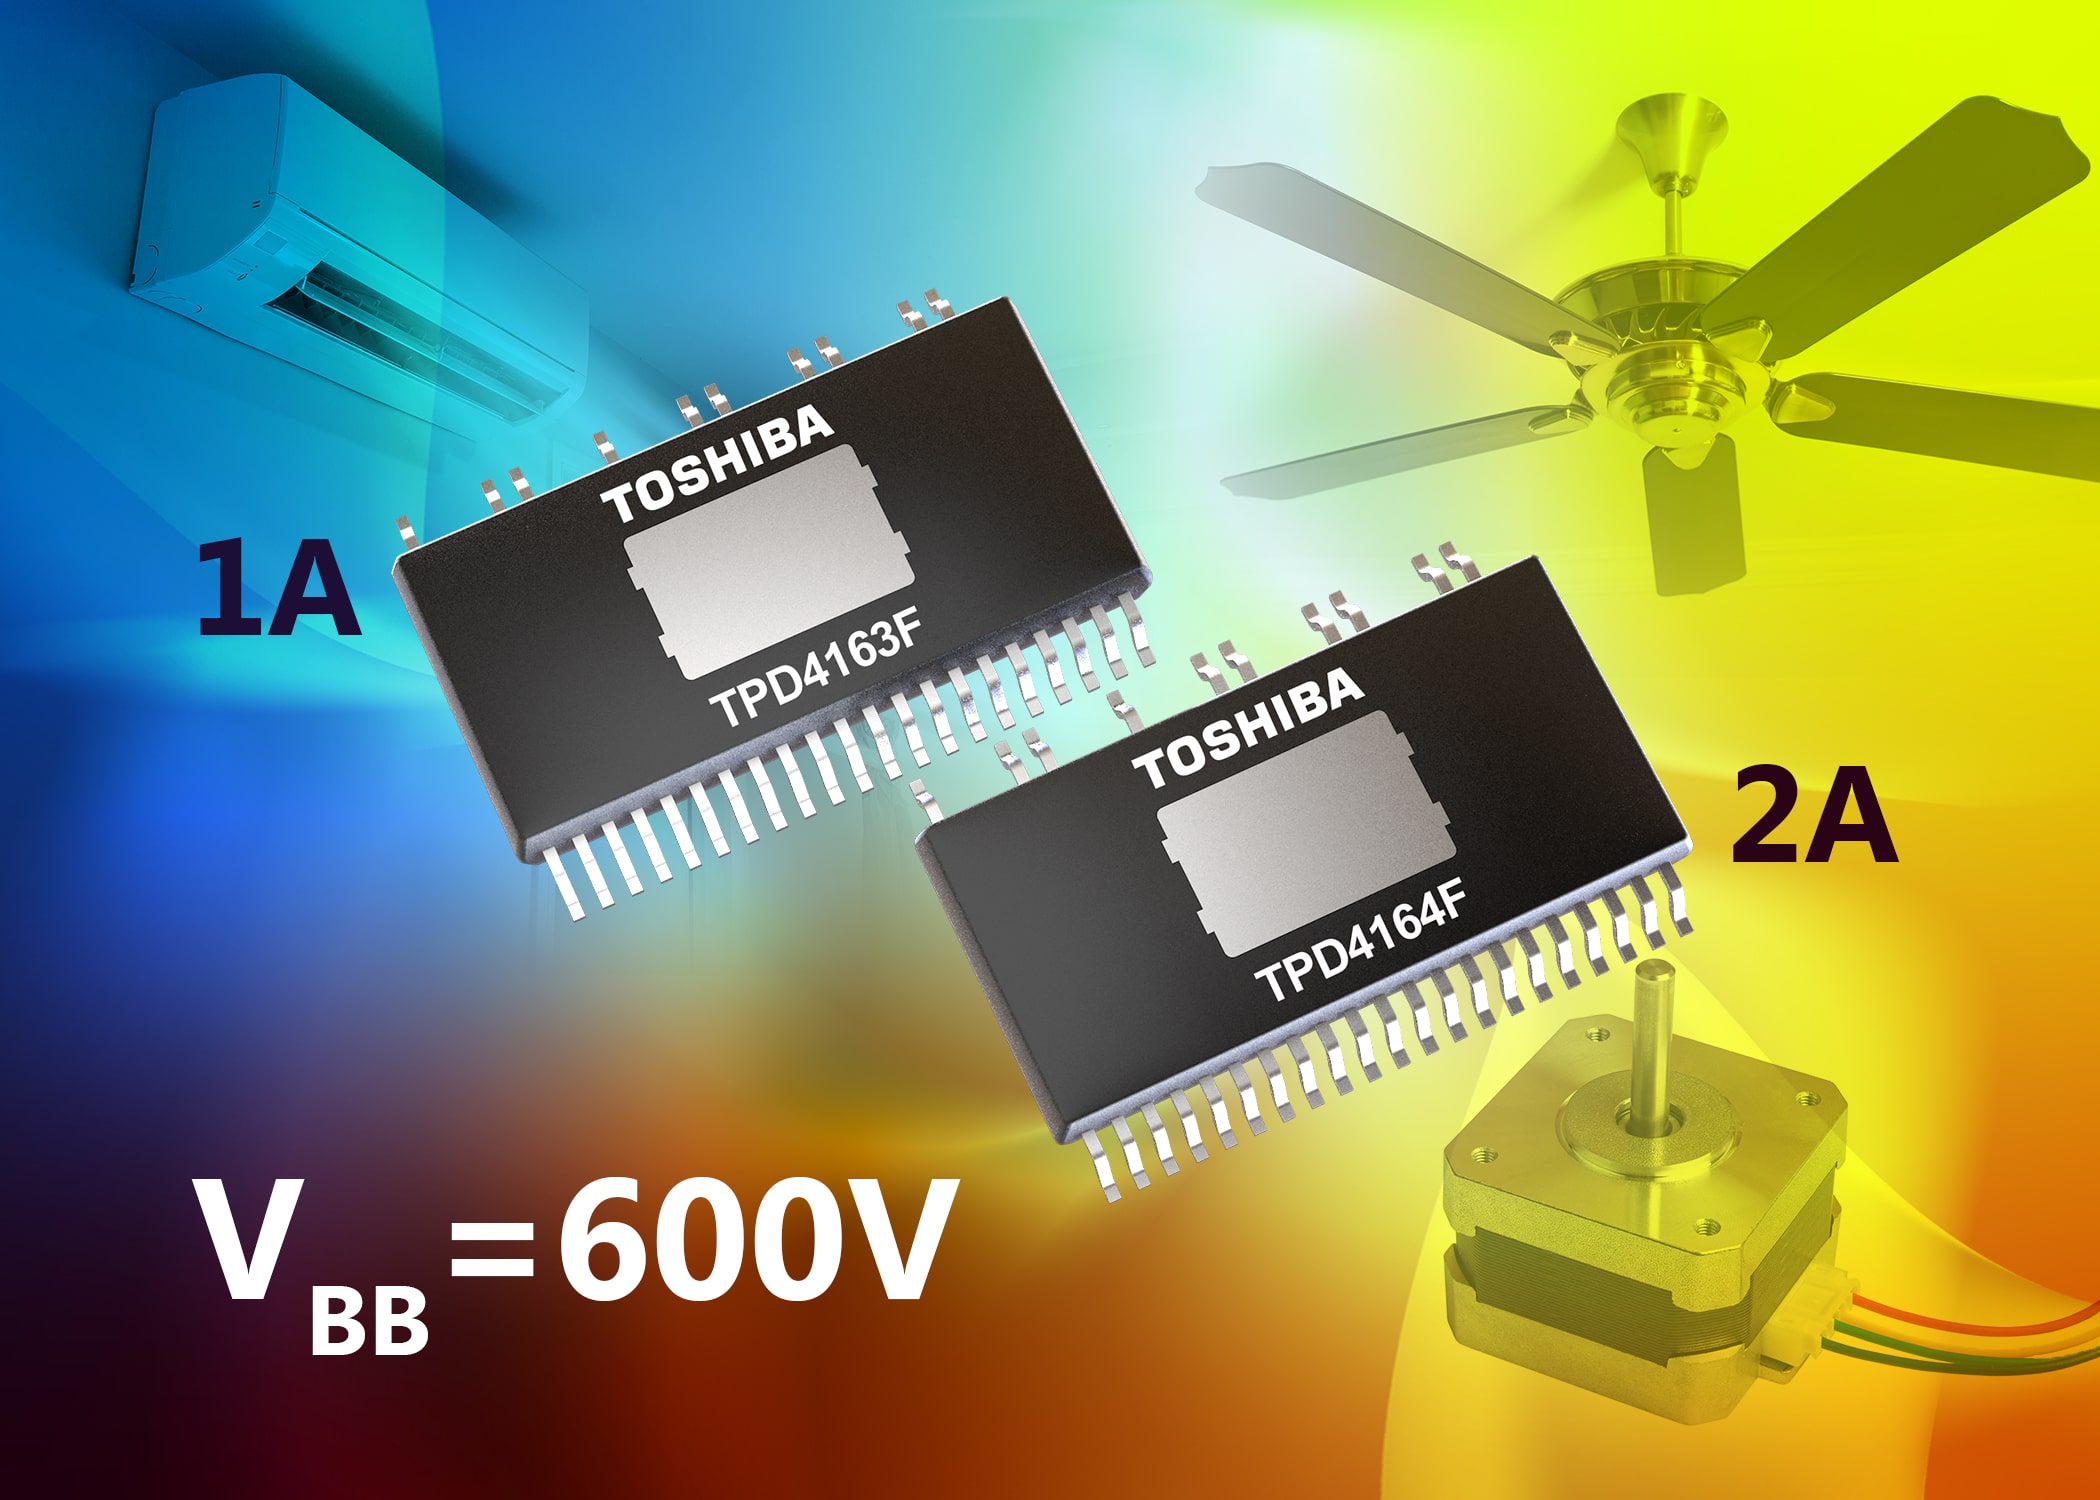 Toshiba introduces 600V-rated intelligent power devices for BLDC motor drive